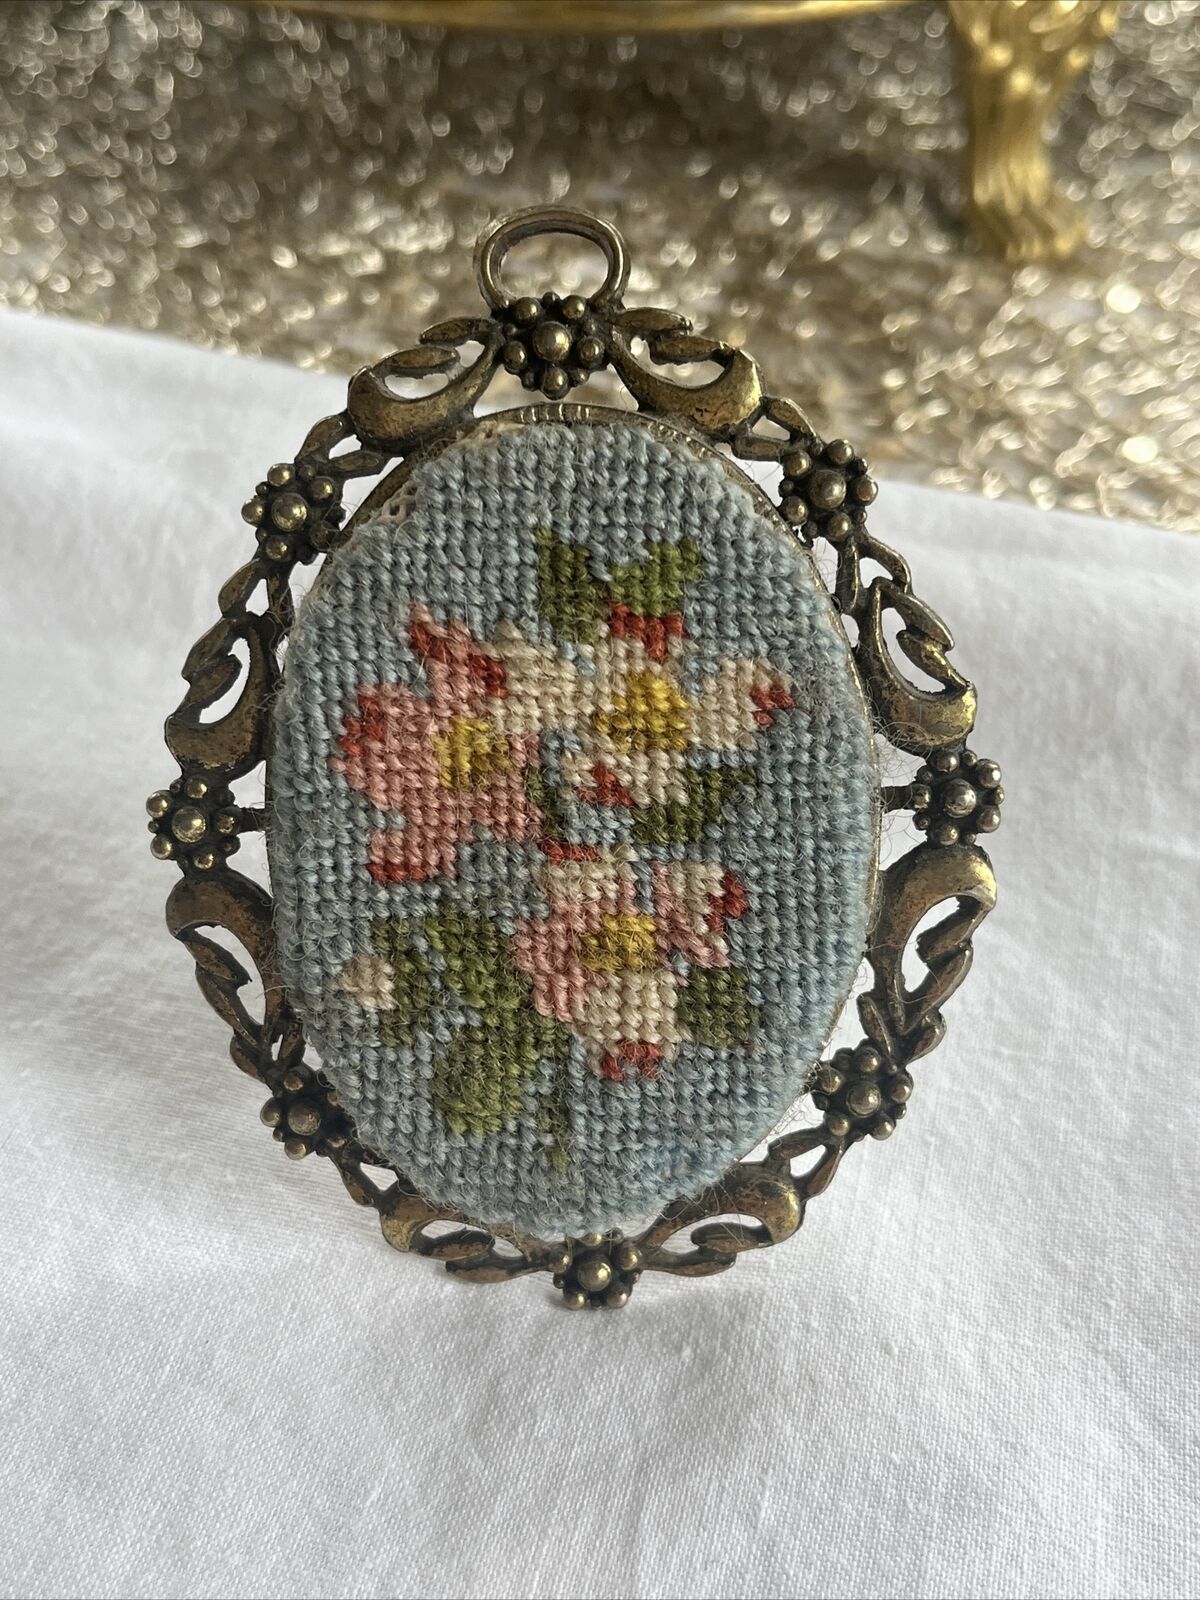 Antique Floral Embroidery In Ornate Gold Metal Frame With Stand 3.5”